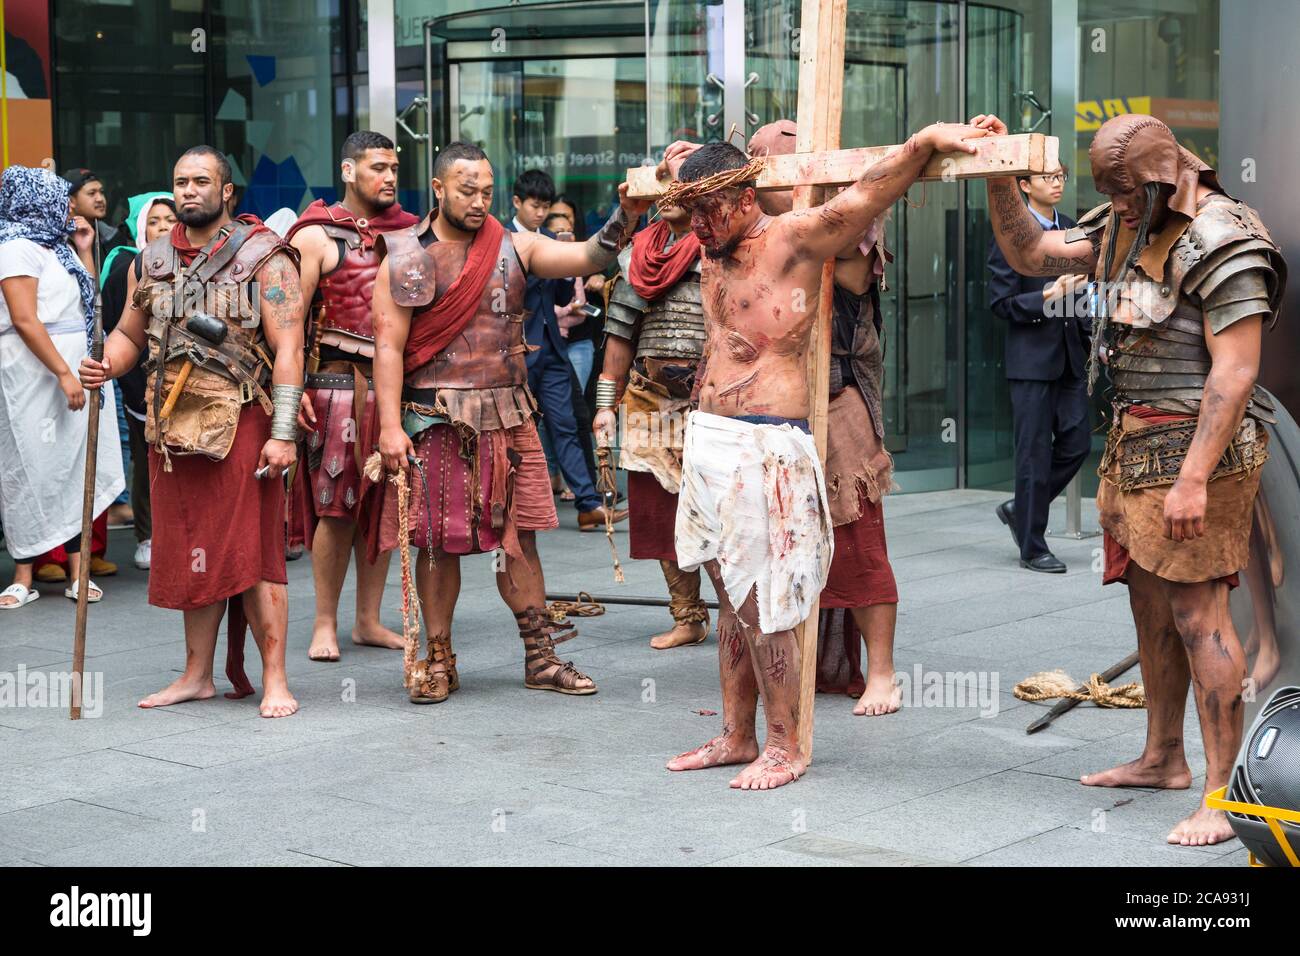 A Reenactment Of The Crucifixion Carried Out By Members Of A Polynesian Church Dressed As Jesus And Roman Soldiers Auckland New Zealand 3 31 18 Stock Photo Alamy